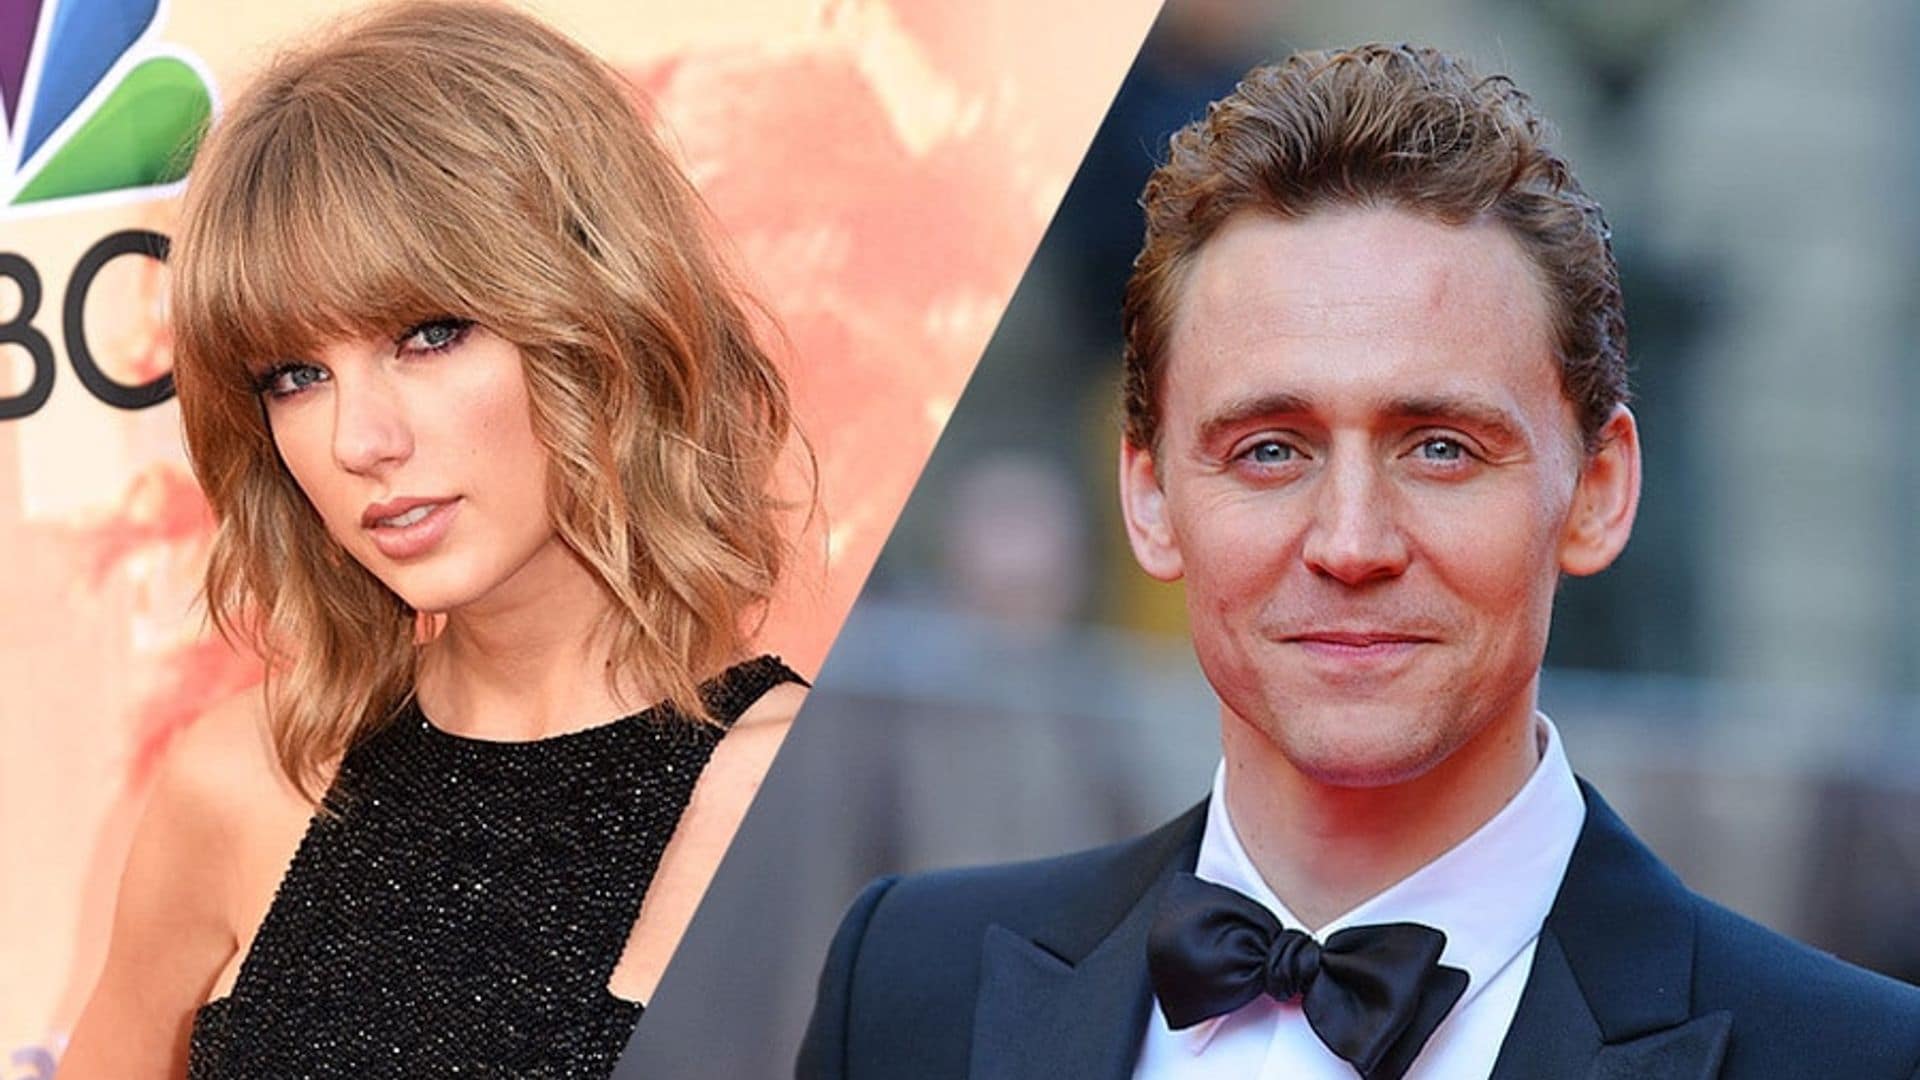 Taylor Swift and Tom Hiddleston's love story ends after three months